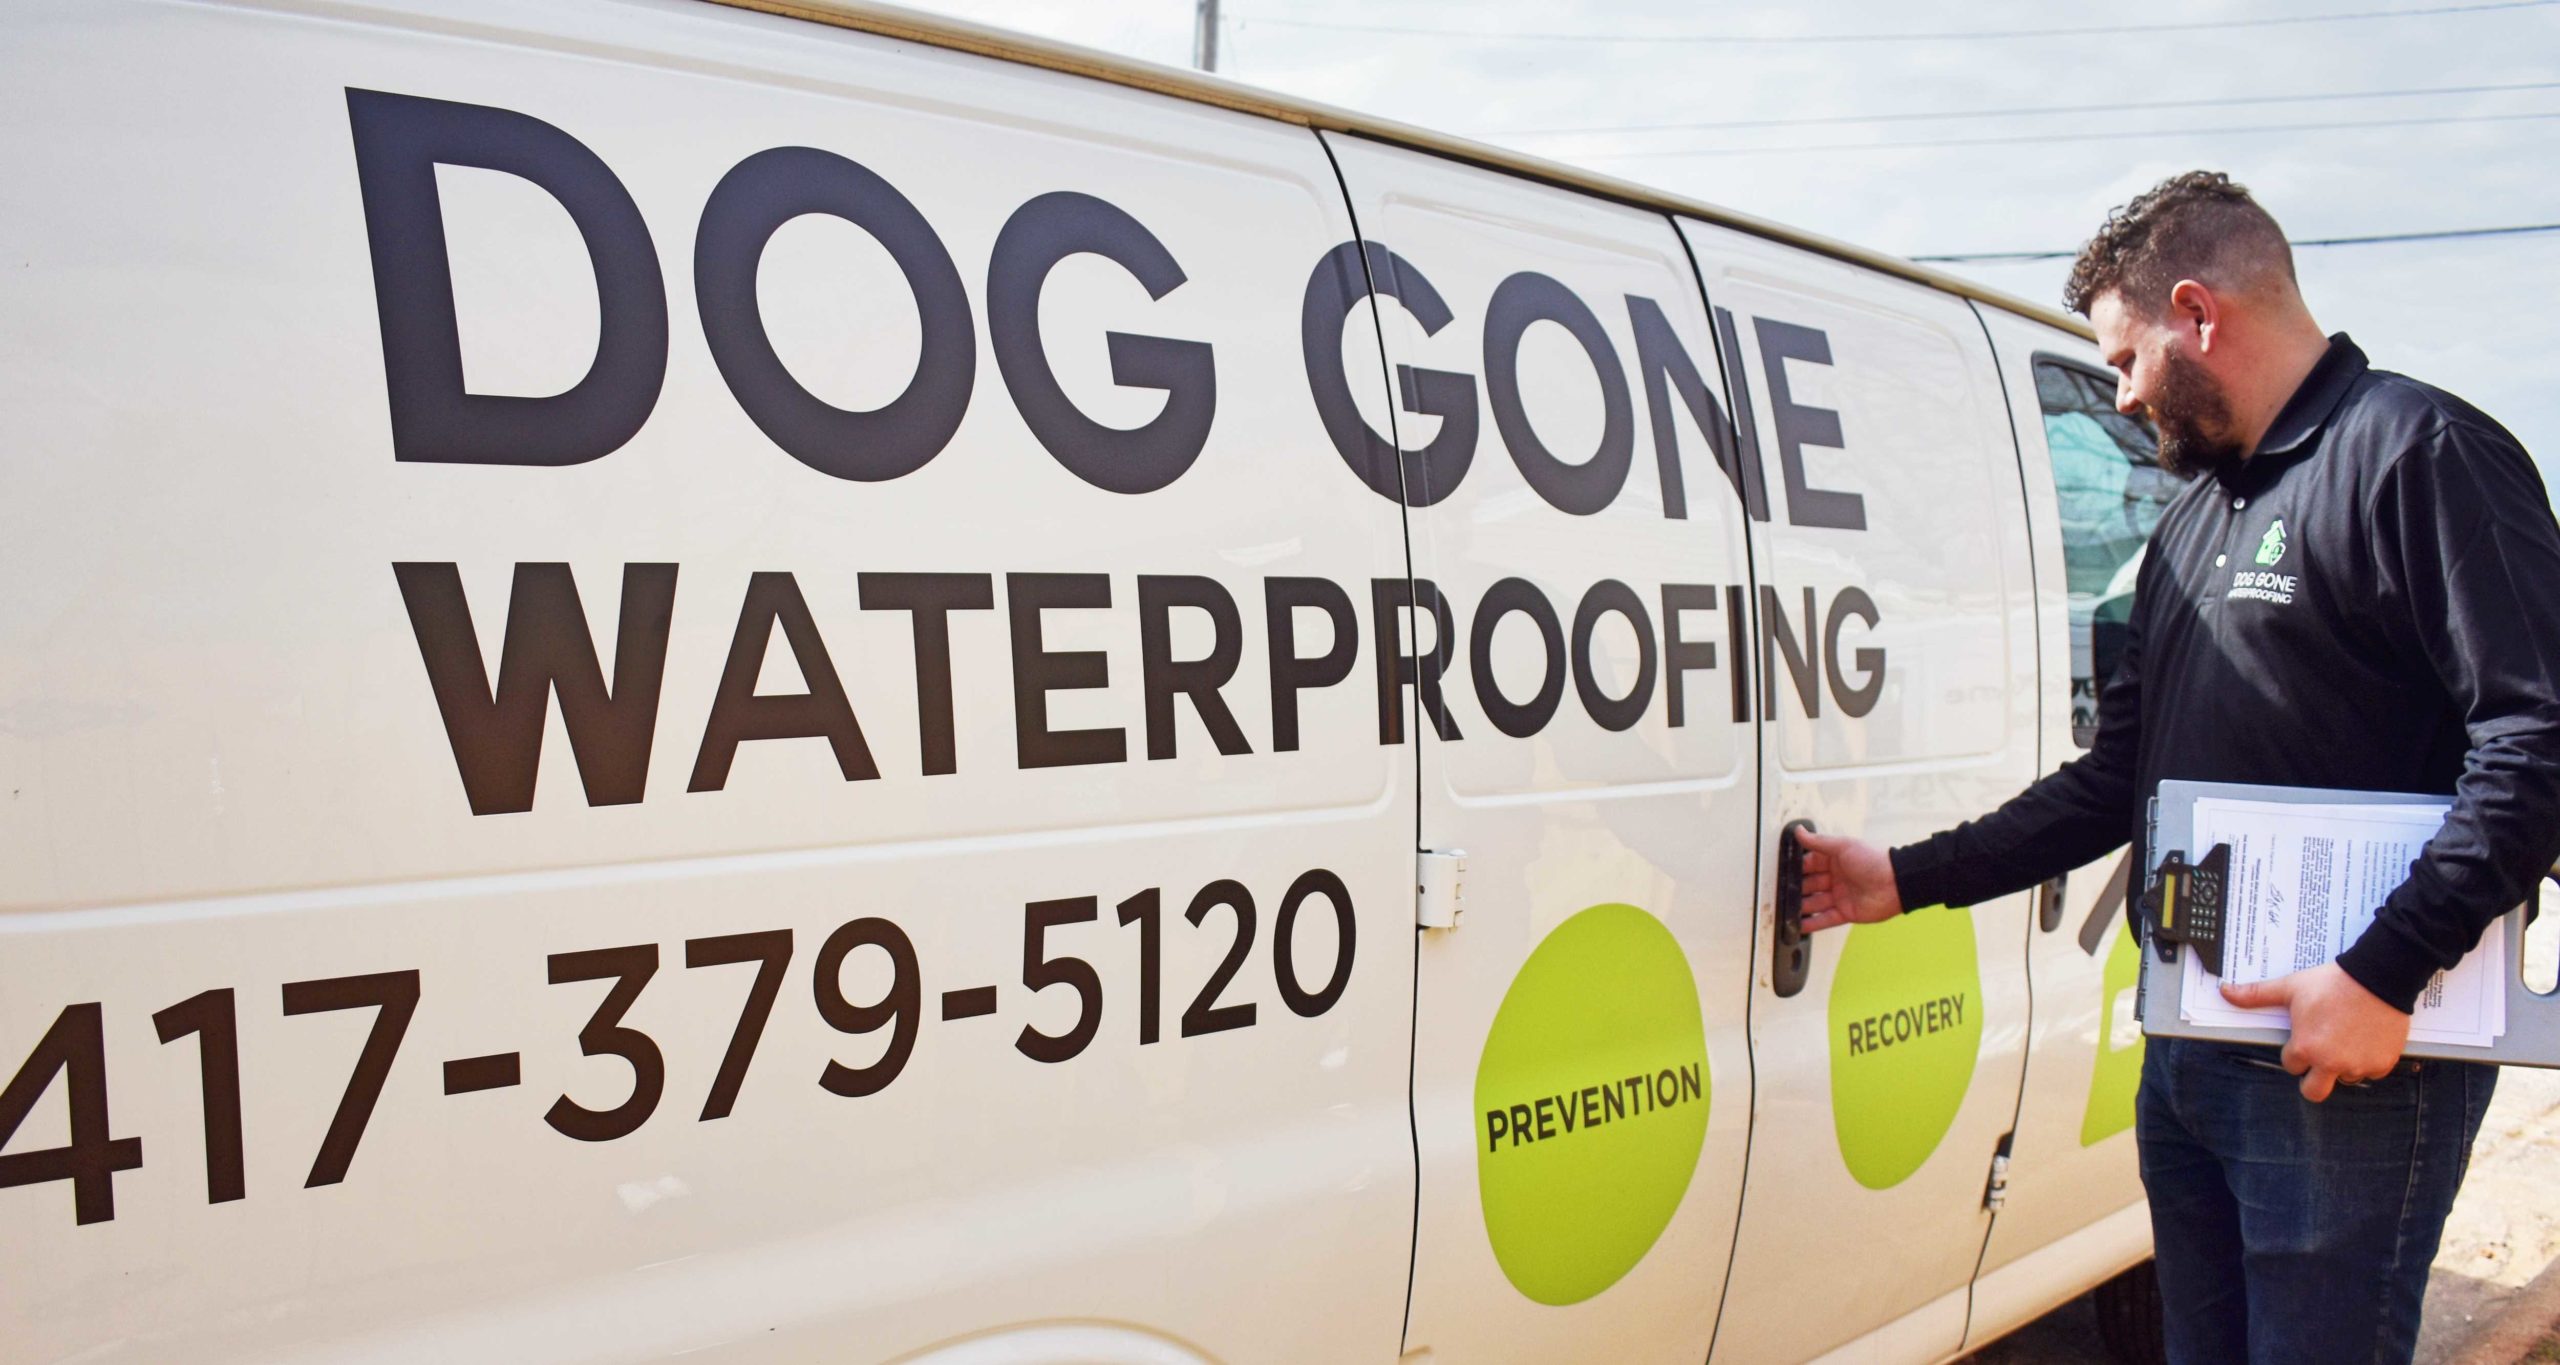 Contact Dog Gone Waterproofing Company in Springfield Missouri